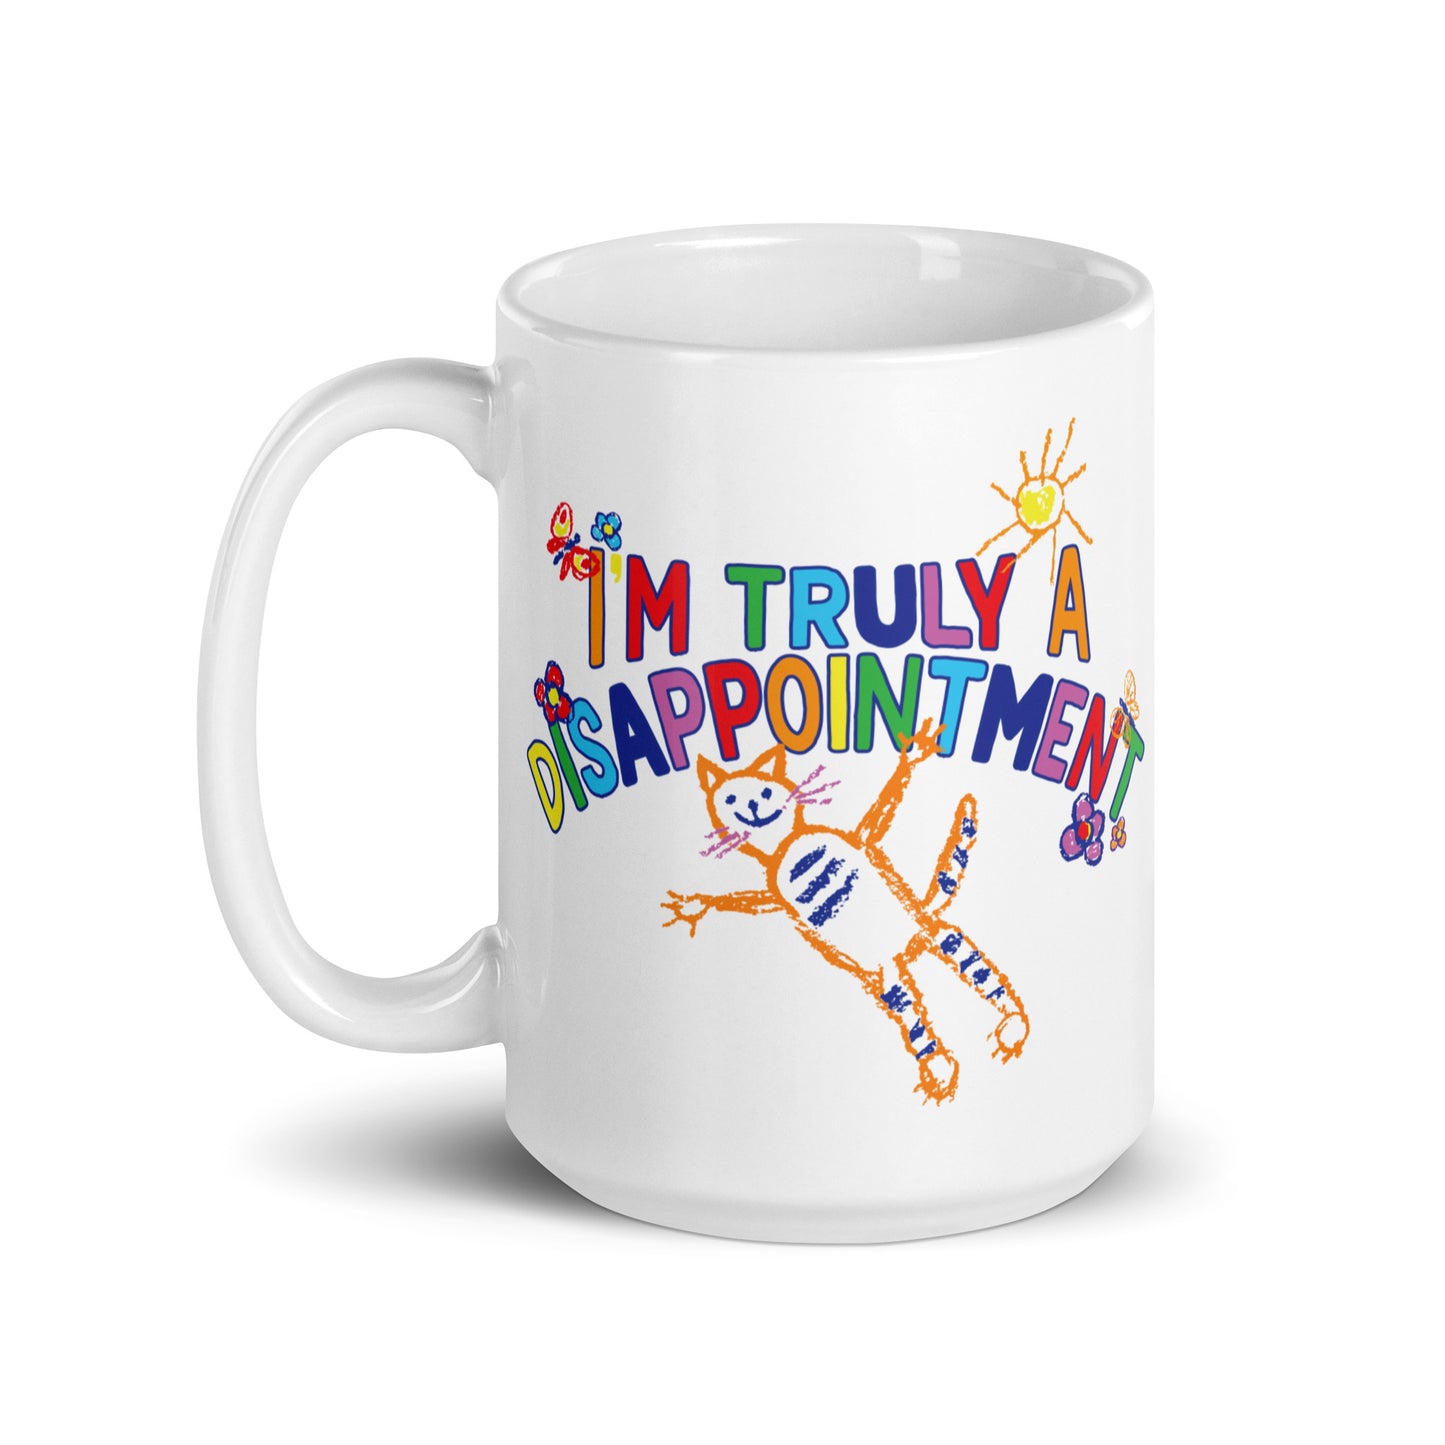 I'm Truly a Disappointment mug